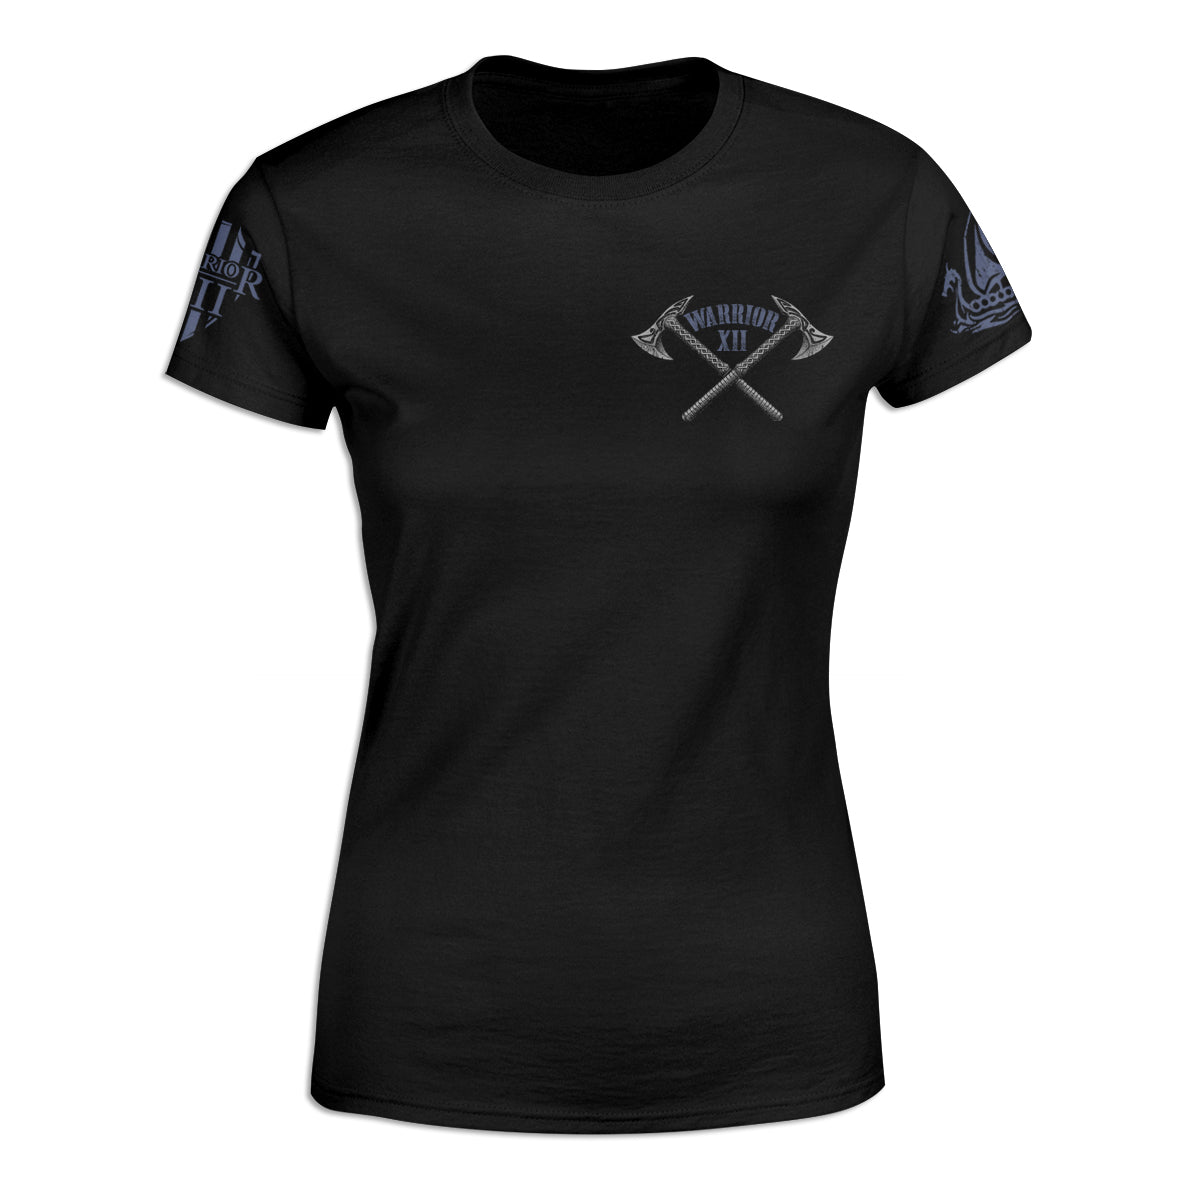 A black women's relaxed fit shirt with two axes crossed over with the words "Warrior XII" printed on the front.